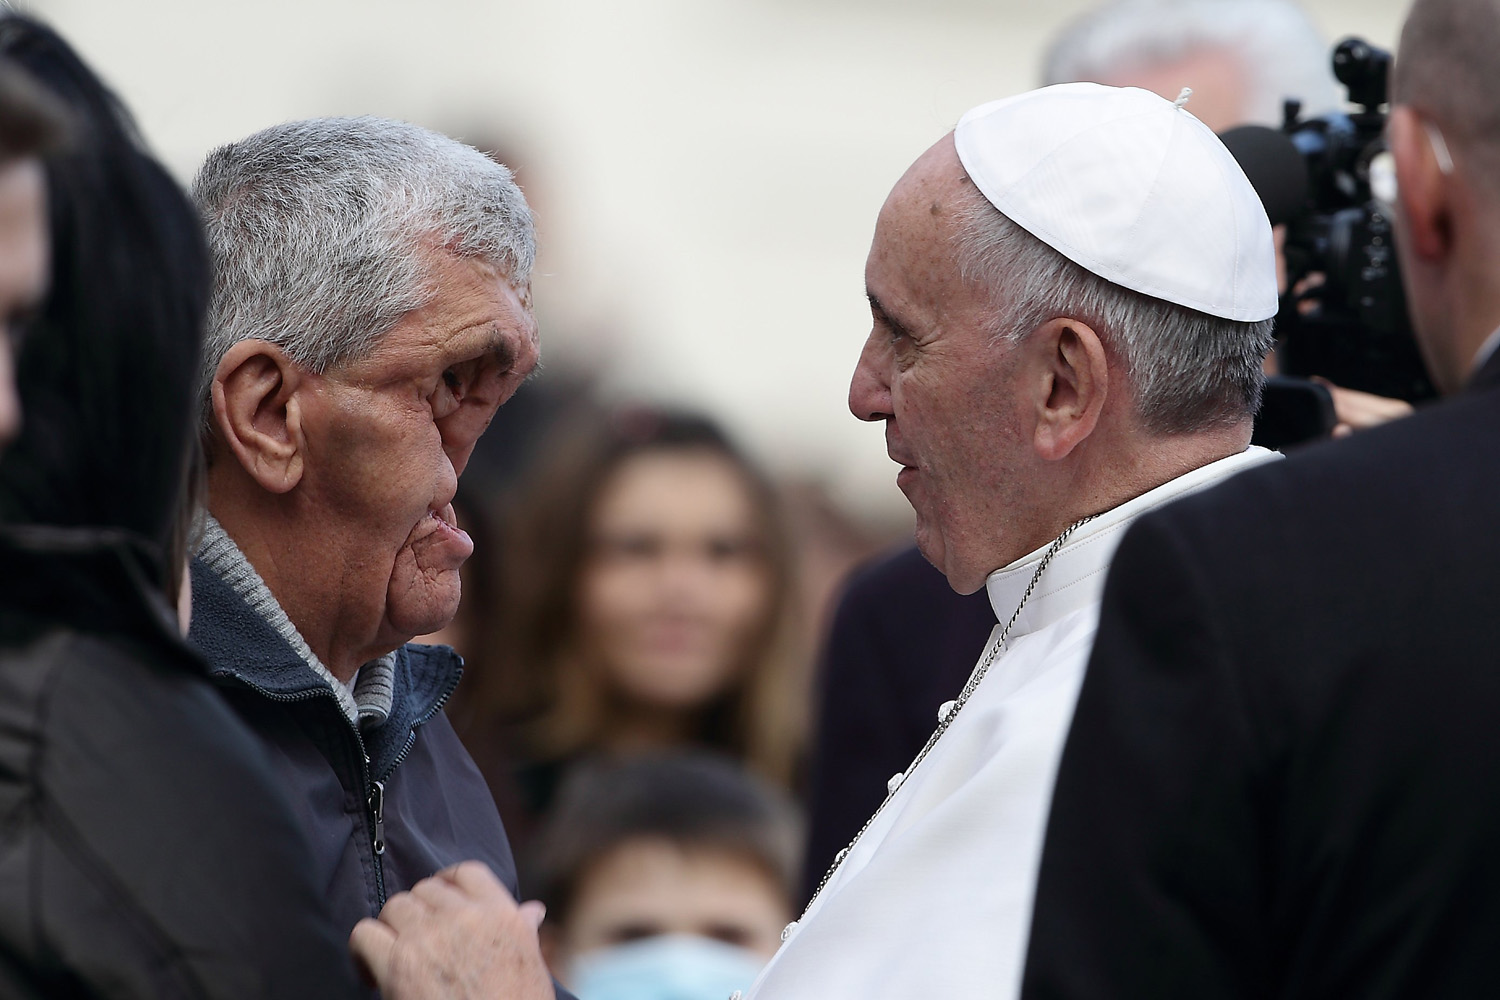 Nov. 20, 2013. Pope Francis blesses a sick man with deformed facial features after his general audience in St. Peter's Square at the Vatican.